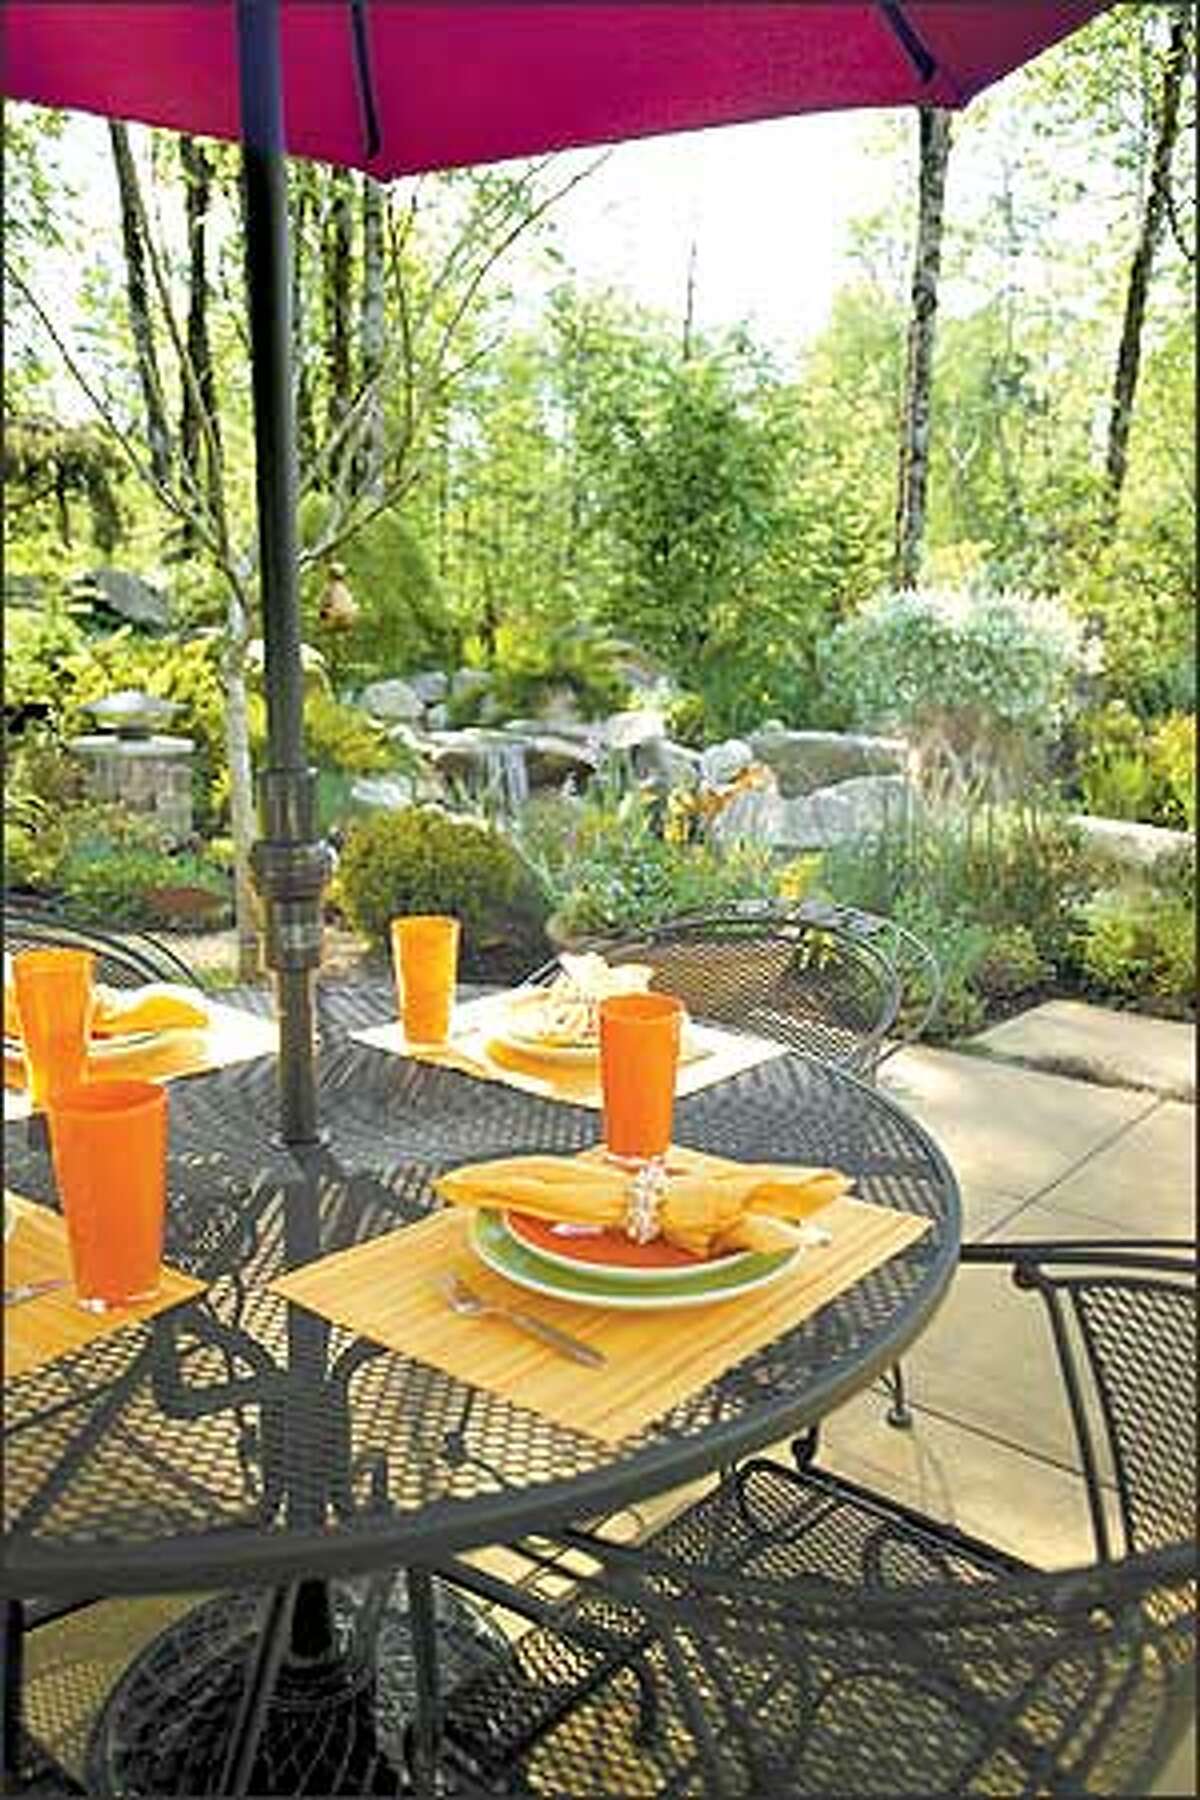 An umbrella-topped wrought-iron dining set allows guests to choose between eating in the sun or shade.